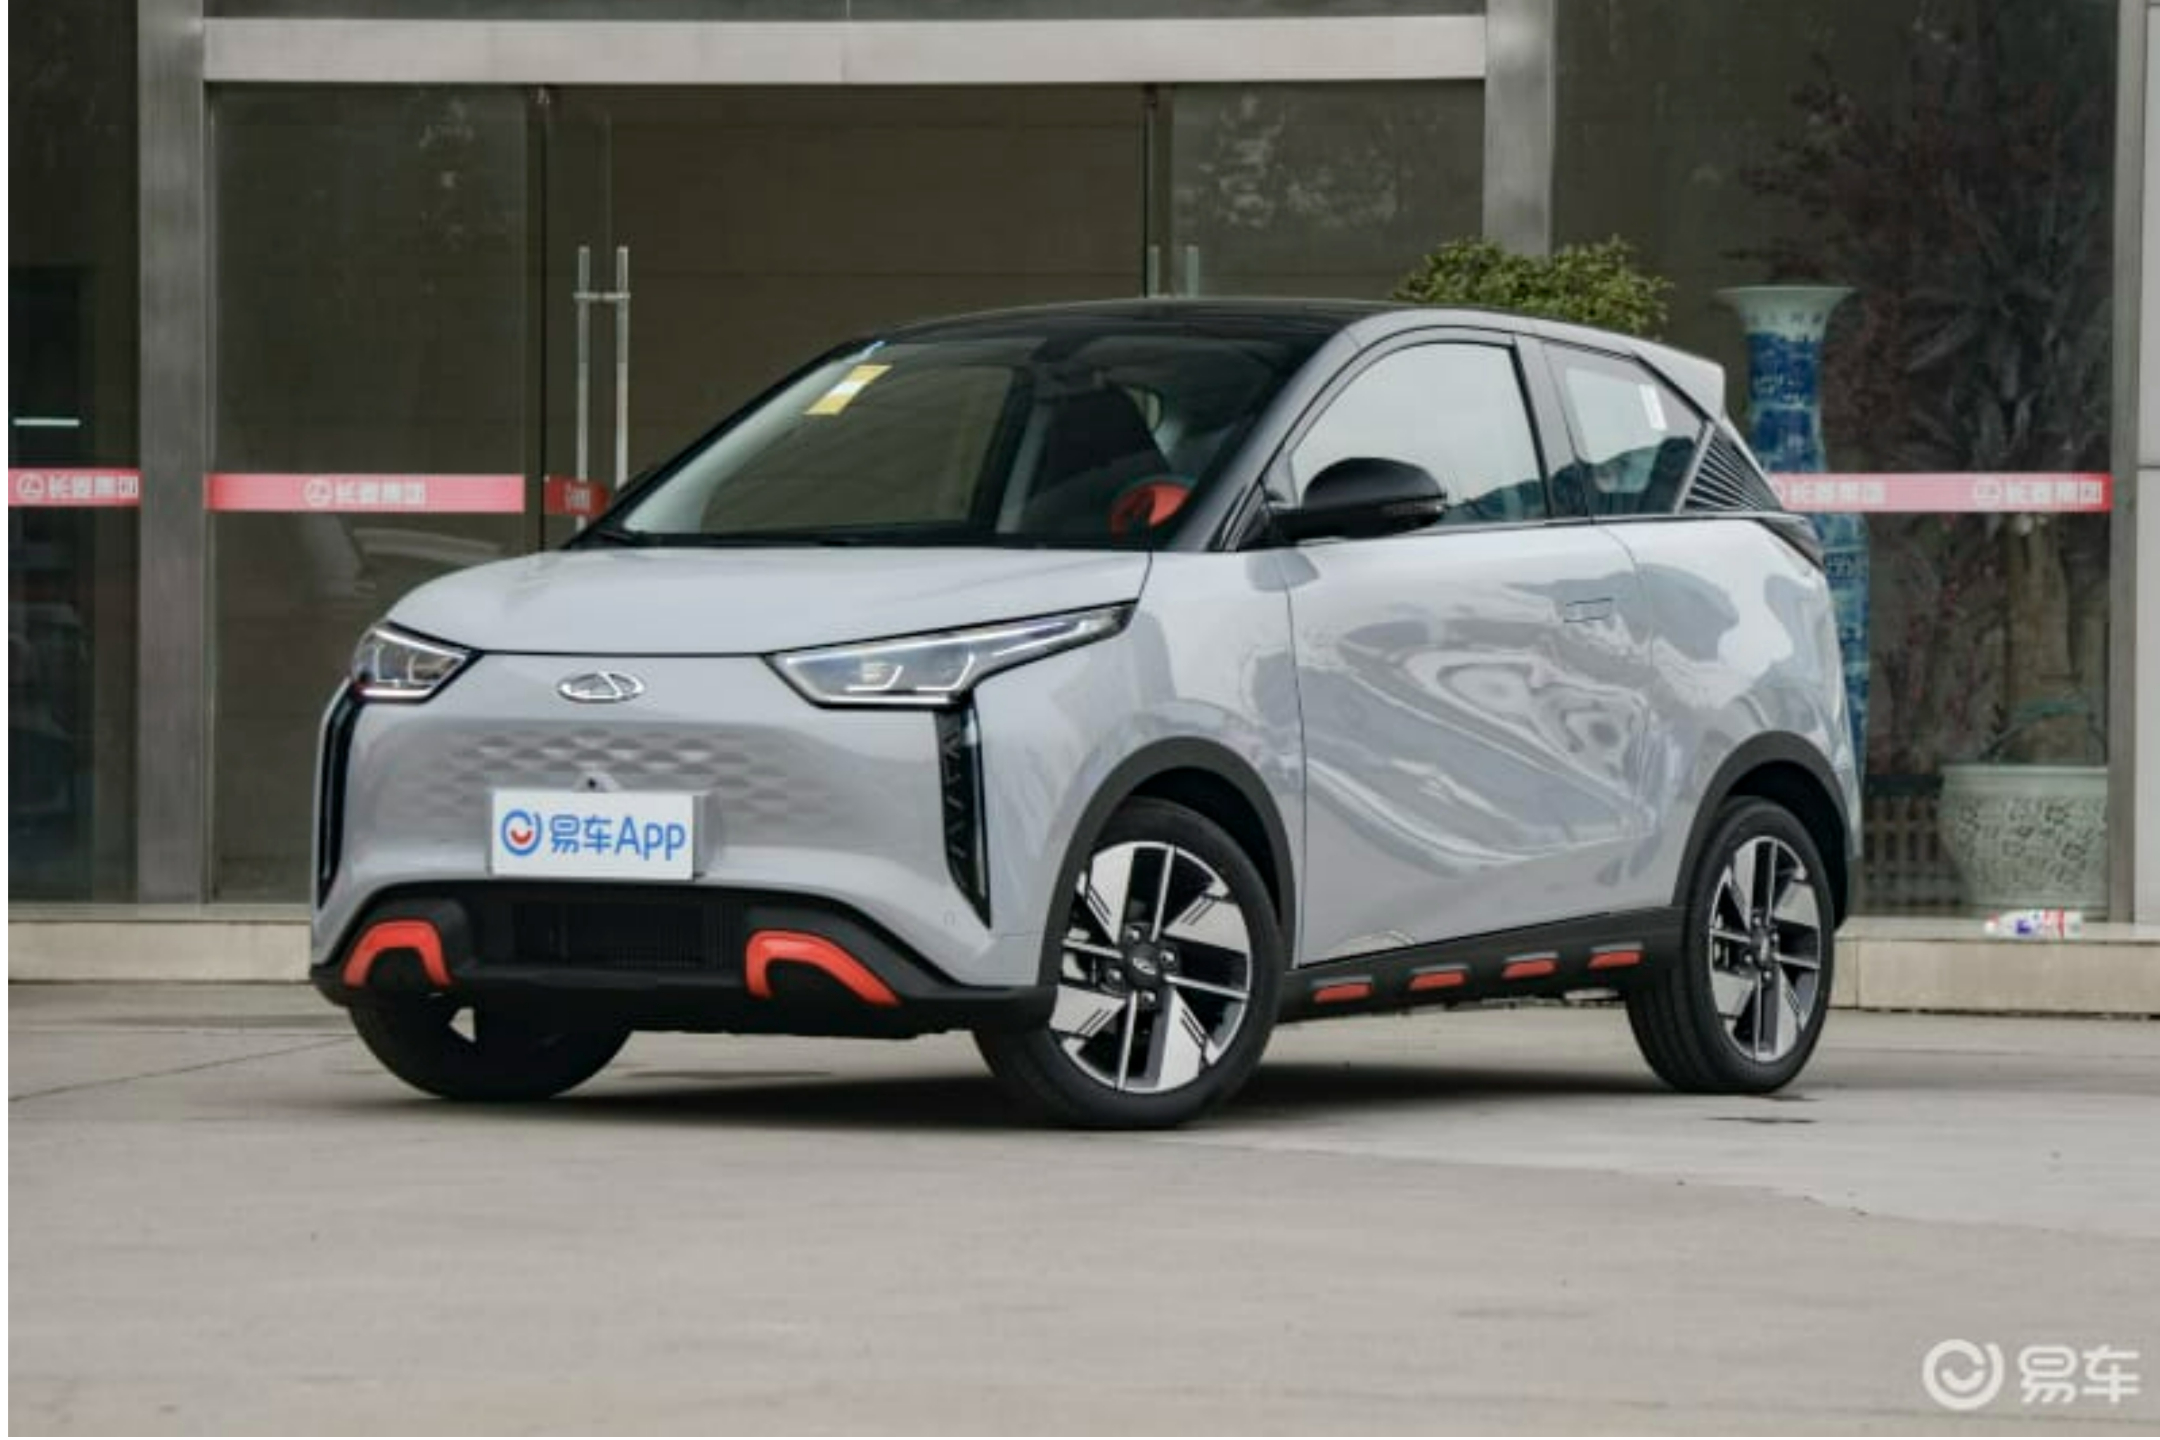 Chery’s electric car model launched for only 310 million VND, will it be brought to Vietnam?